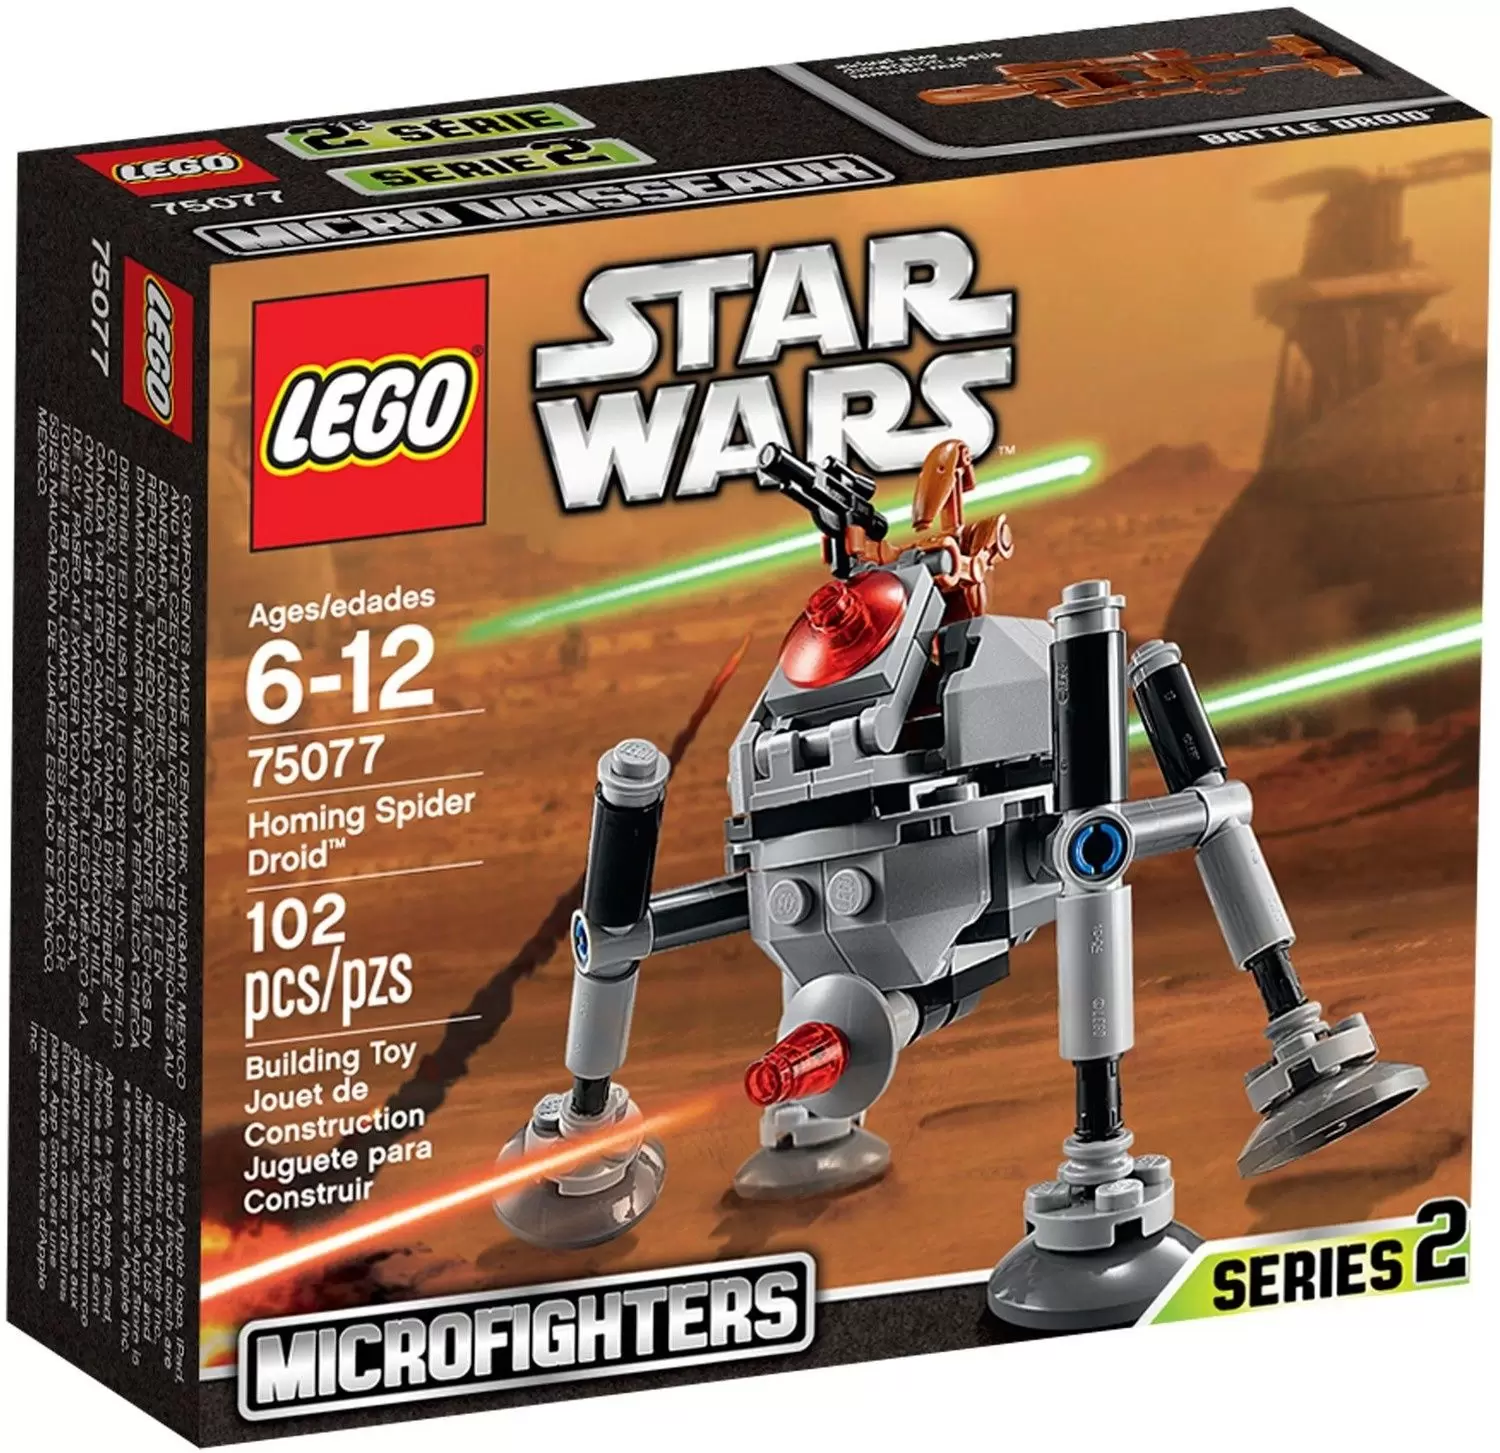 LEGO Star Wars - Homing Spider Droid (Microfighters)